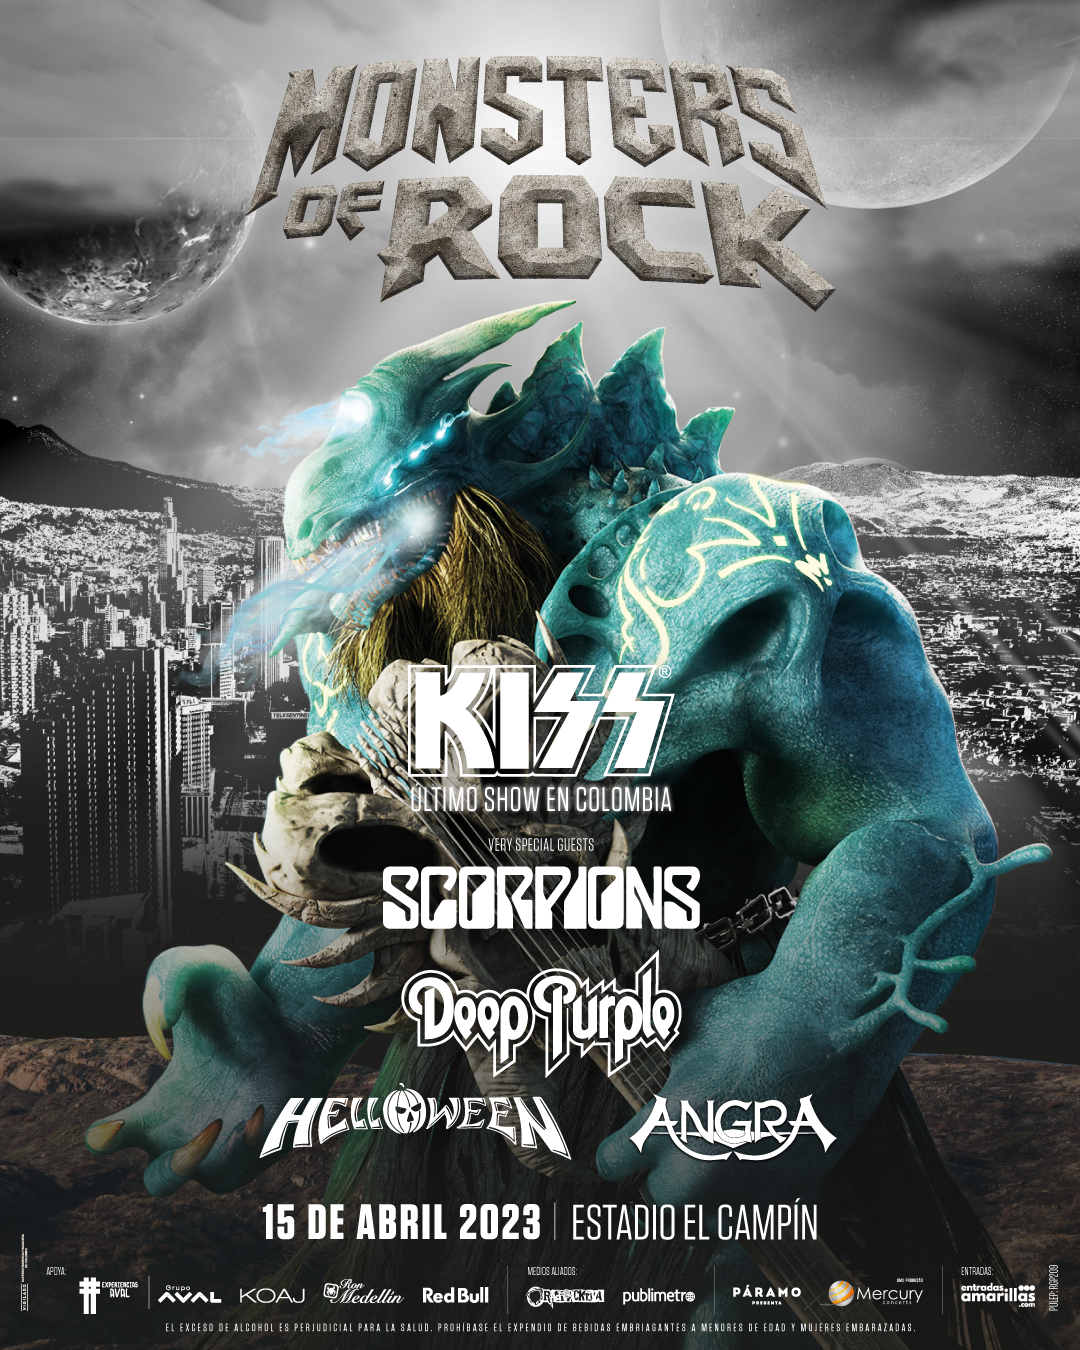 Monsters Of Rock llega a Colombia